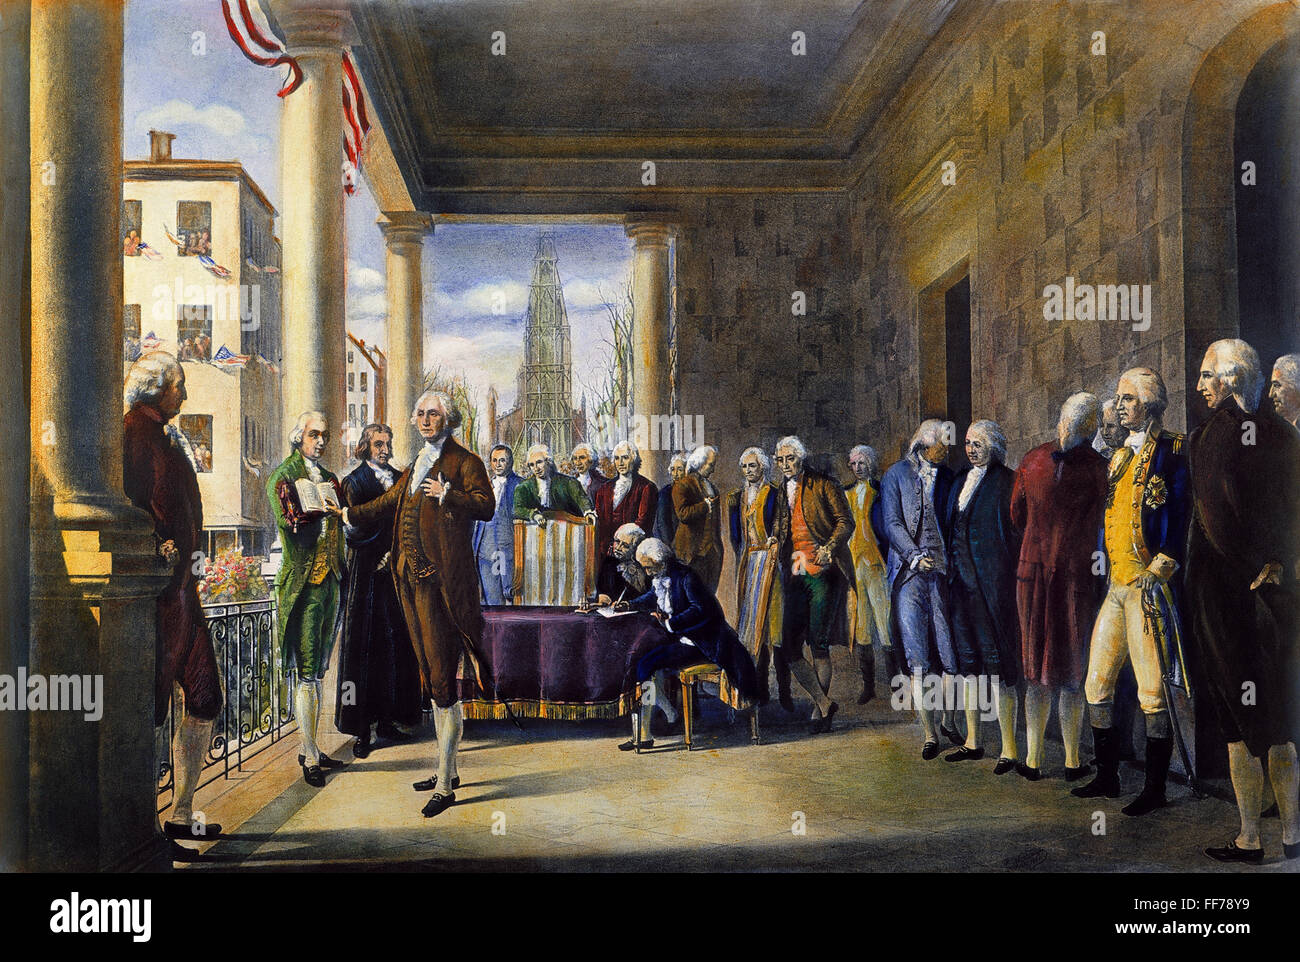 WASHINGTON: INAUGURATION. /nThe inauguration of George Washington as the first President of the United States at Federal Hall, New York City, 30 April 1789. After a painting, 1889, by Ramon de Elorriaga. Stock Photo